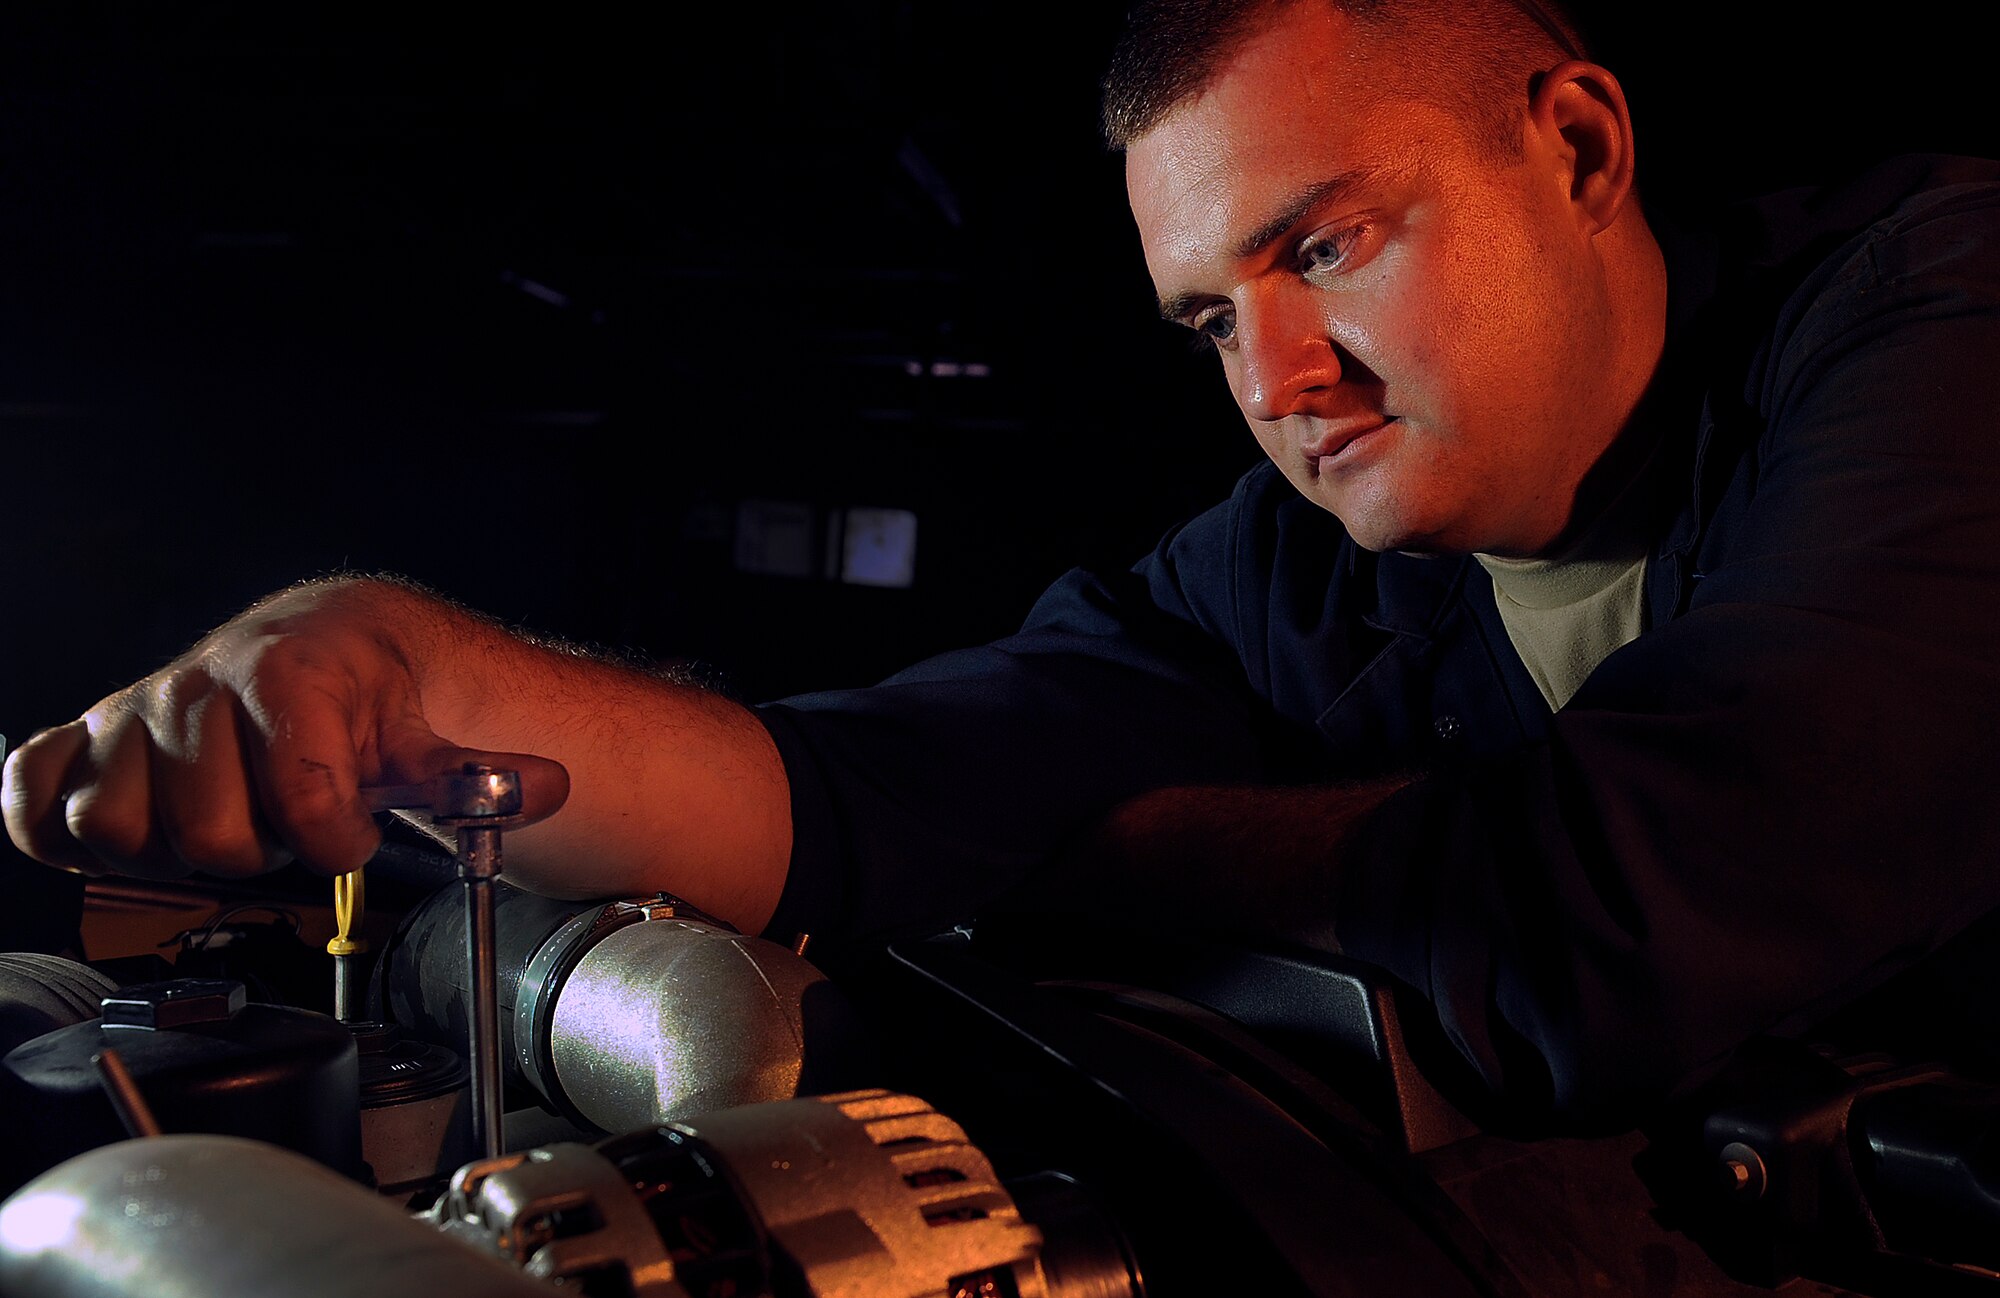 Staff Sgt. Kevin Jones, 28th Logistics Readiness Squadron vehicle maintenance craftsman, loosens a bolt while replacing an exhaust gas recirculation valve on a bio-diesel engine truck here, July 15. The exhaust gas recirculation valve recirculates unburned fuel back through the engine intake to allow cleaner emissions. (U.S. Air Force photo/Airman 1st Class Joshua J. Seybert)